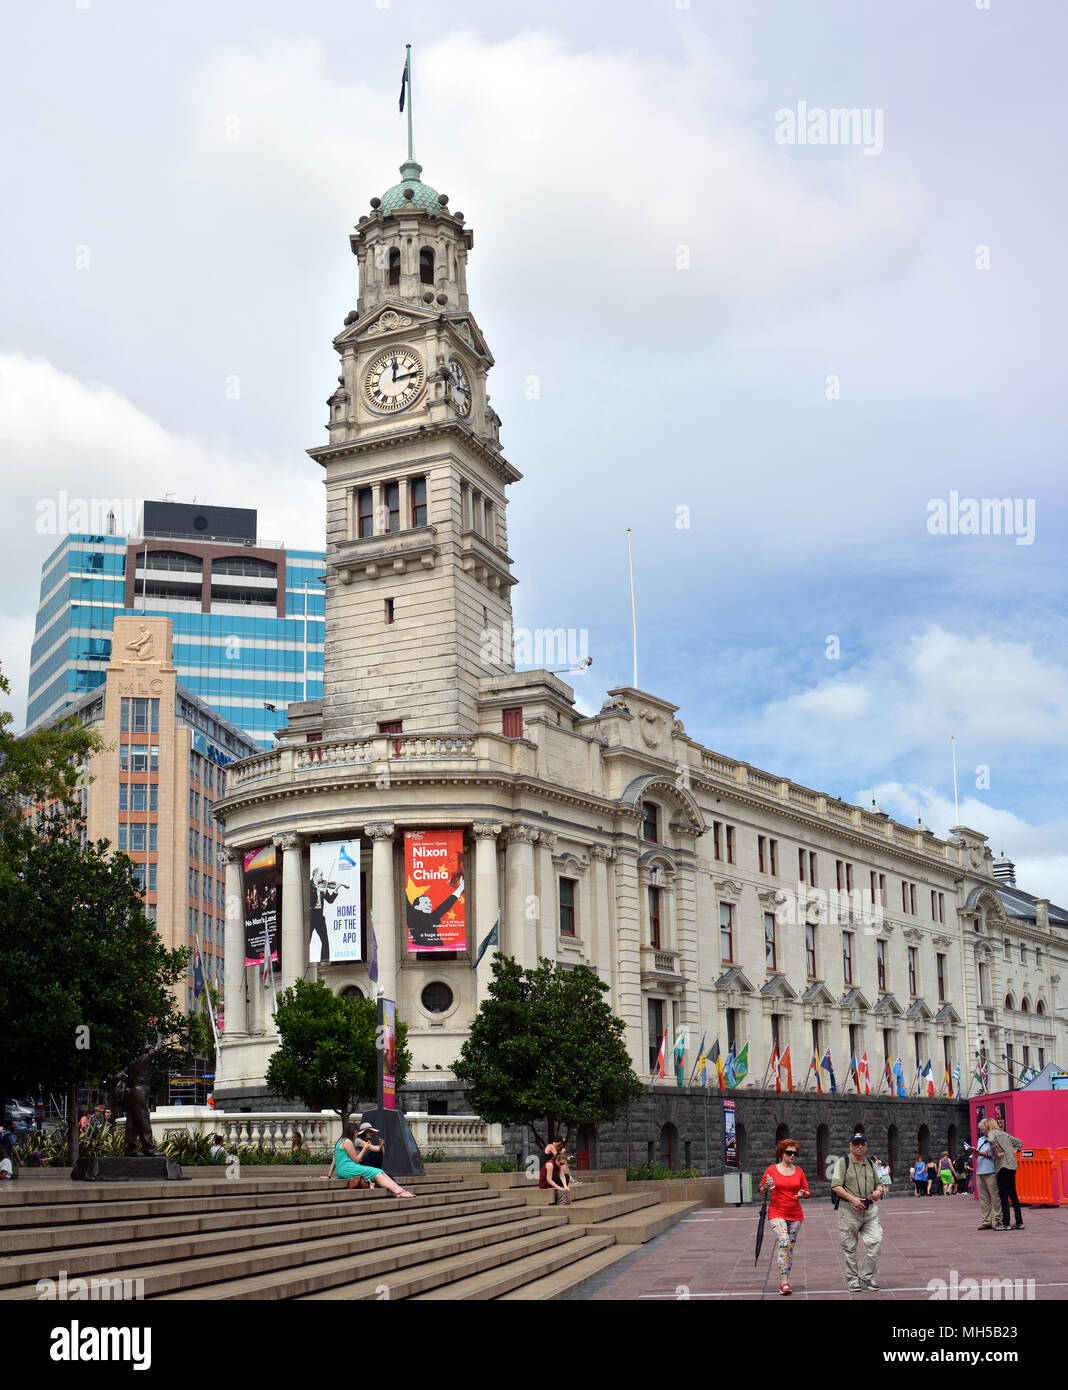 Auckland, New Zealand - February 28, 2016; Auckland Town Hall building and clock tower in Aotea Square, Queen Street. Stock Photo